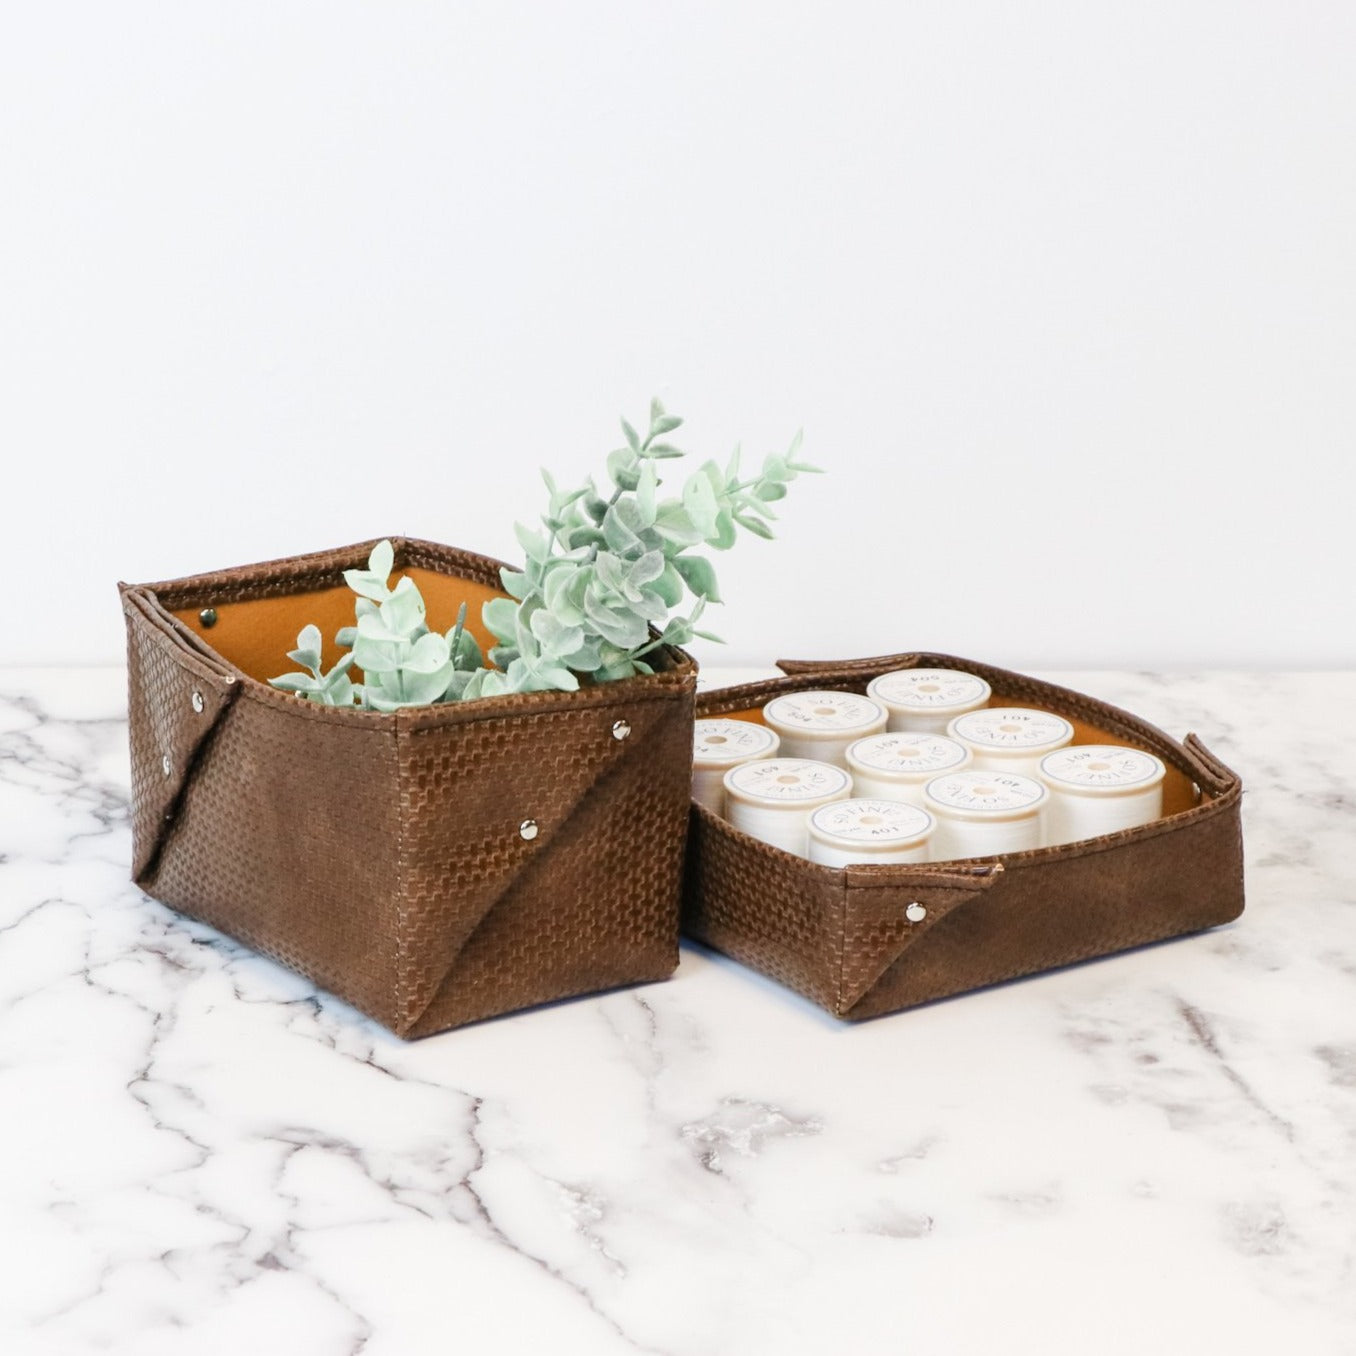 Free! Custom Tray or Basket Instant Download